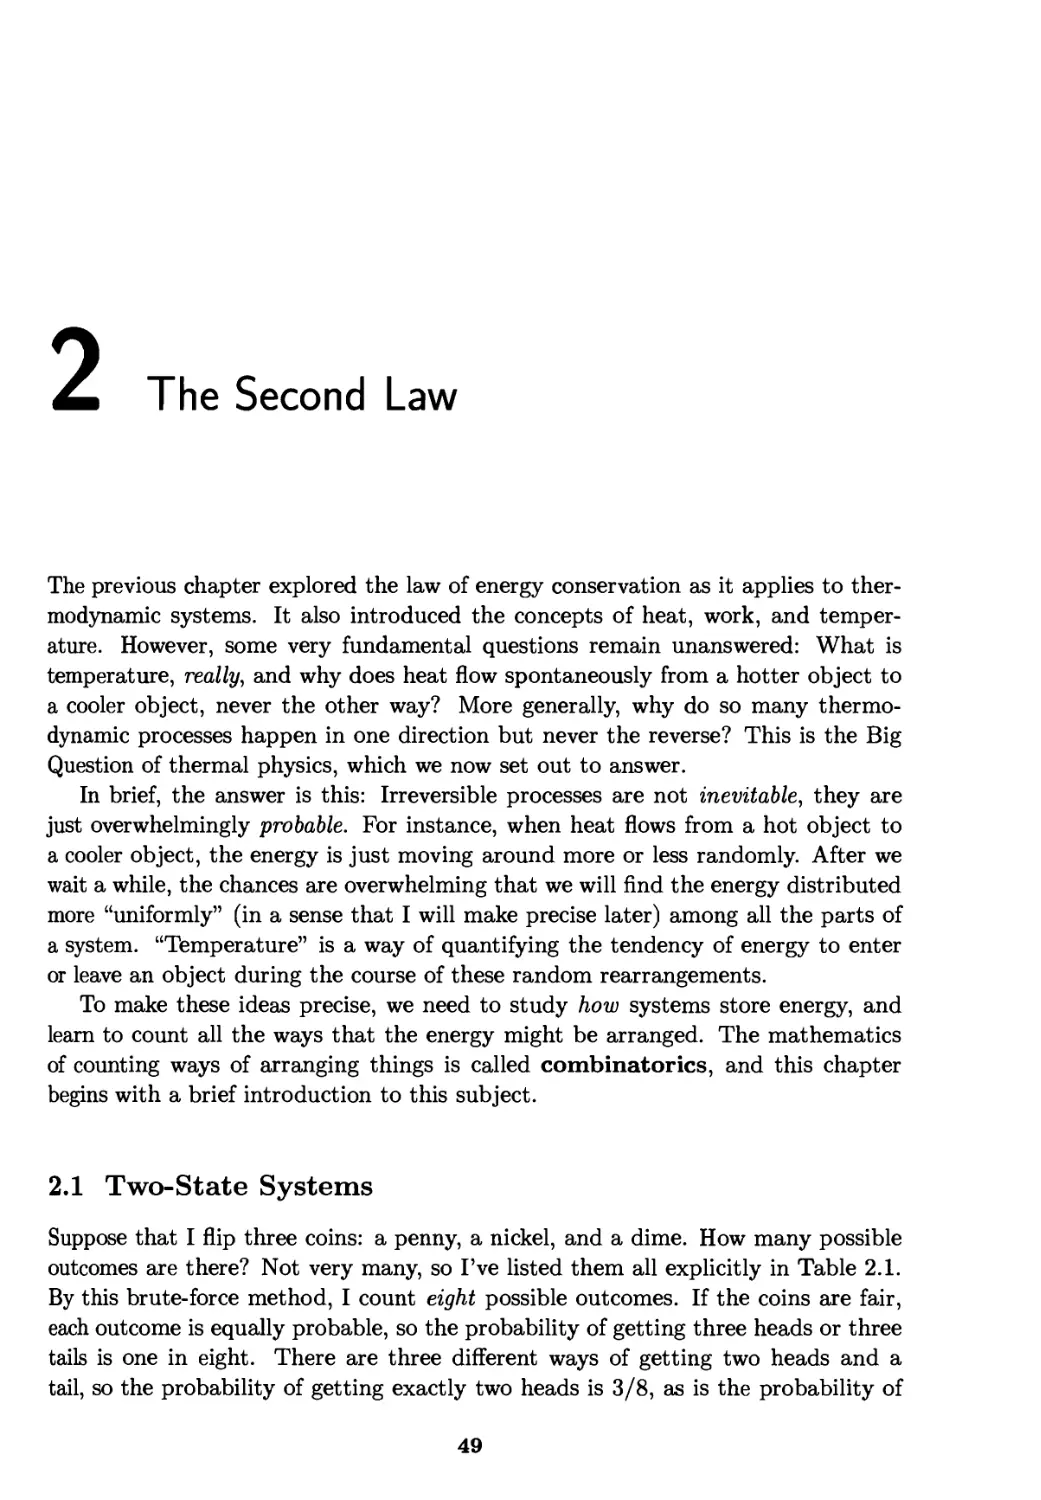 Chapter 2. The Second Law